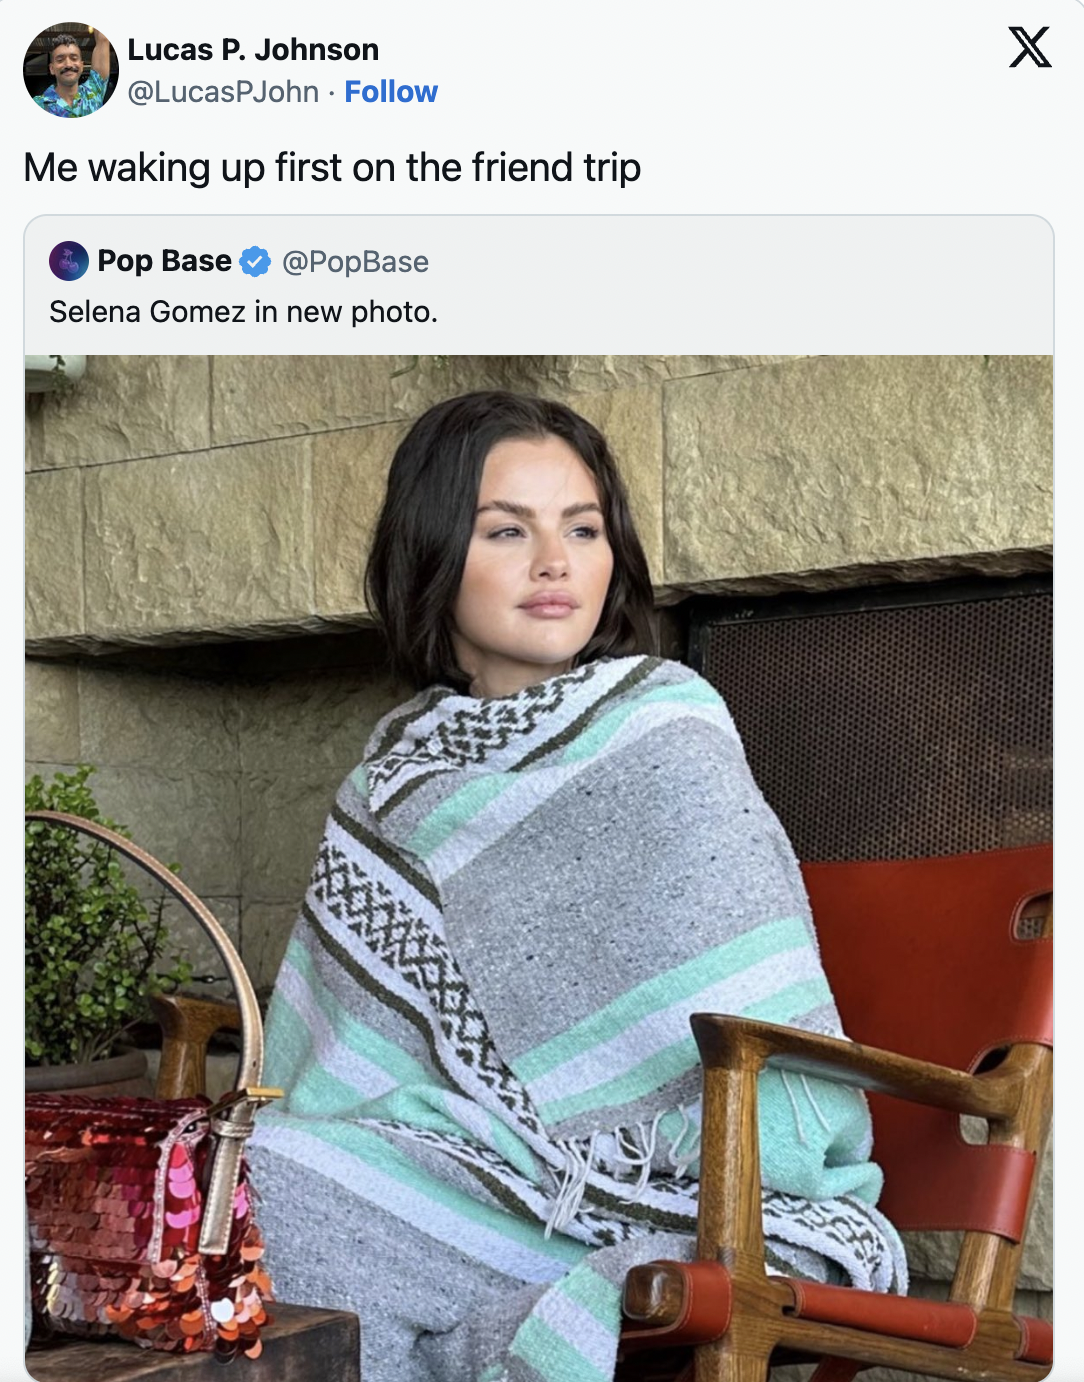 selena gomez in a blanket - stole - Lucas P. Johnson Me waking up first on the friend trip E Pop Base Selena Gomez in new photo. X